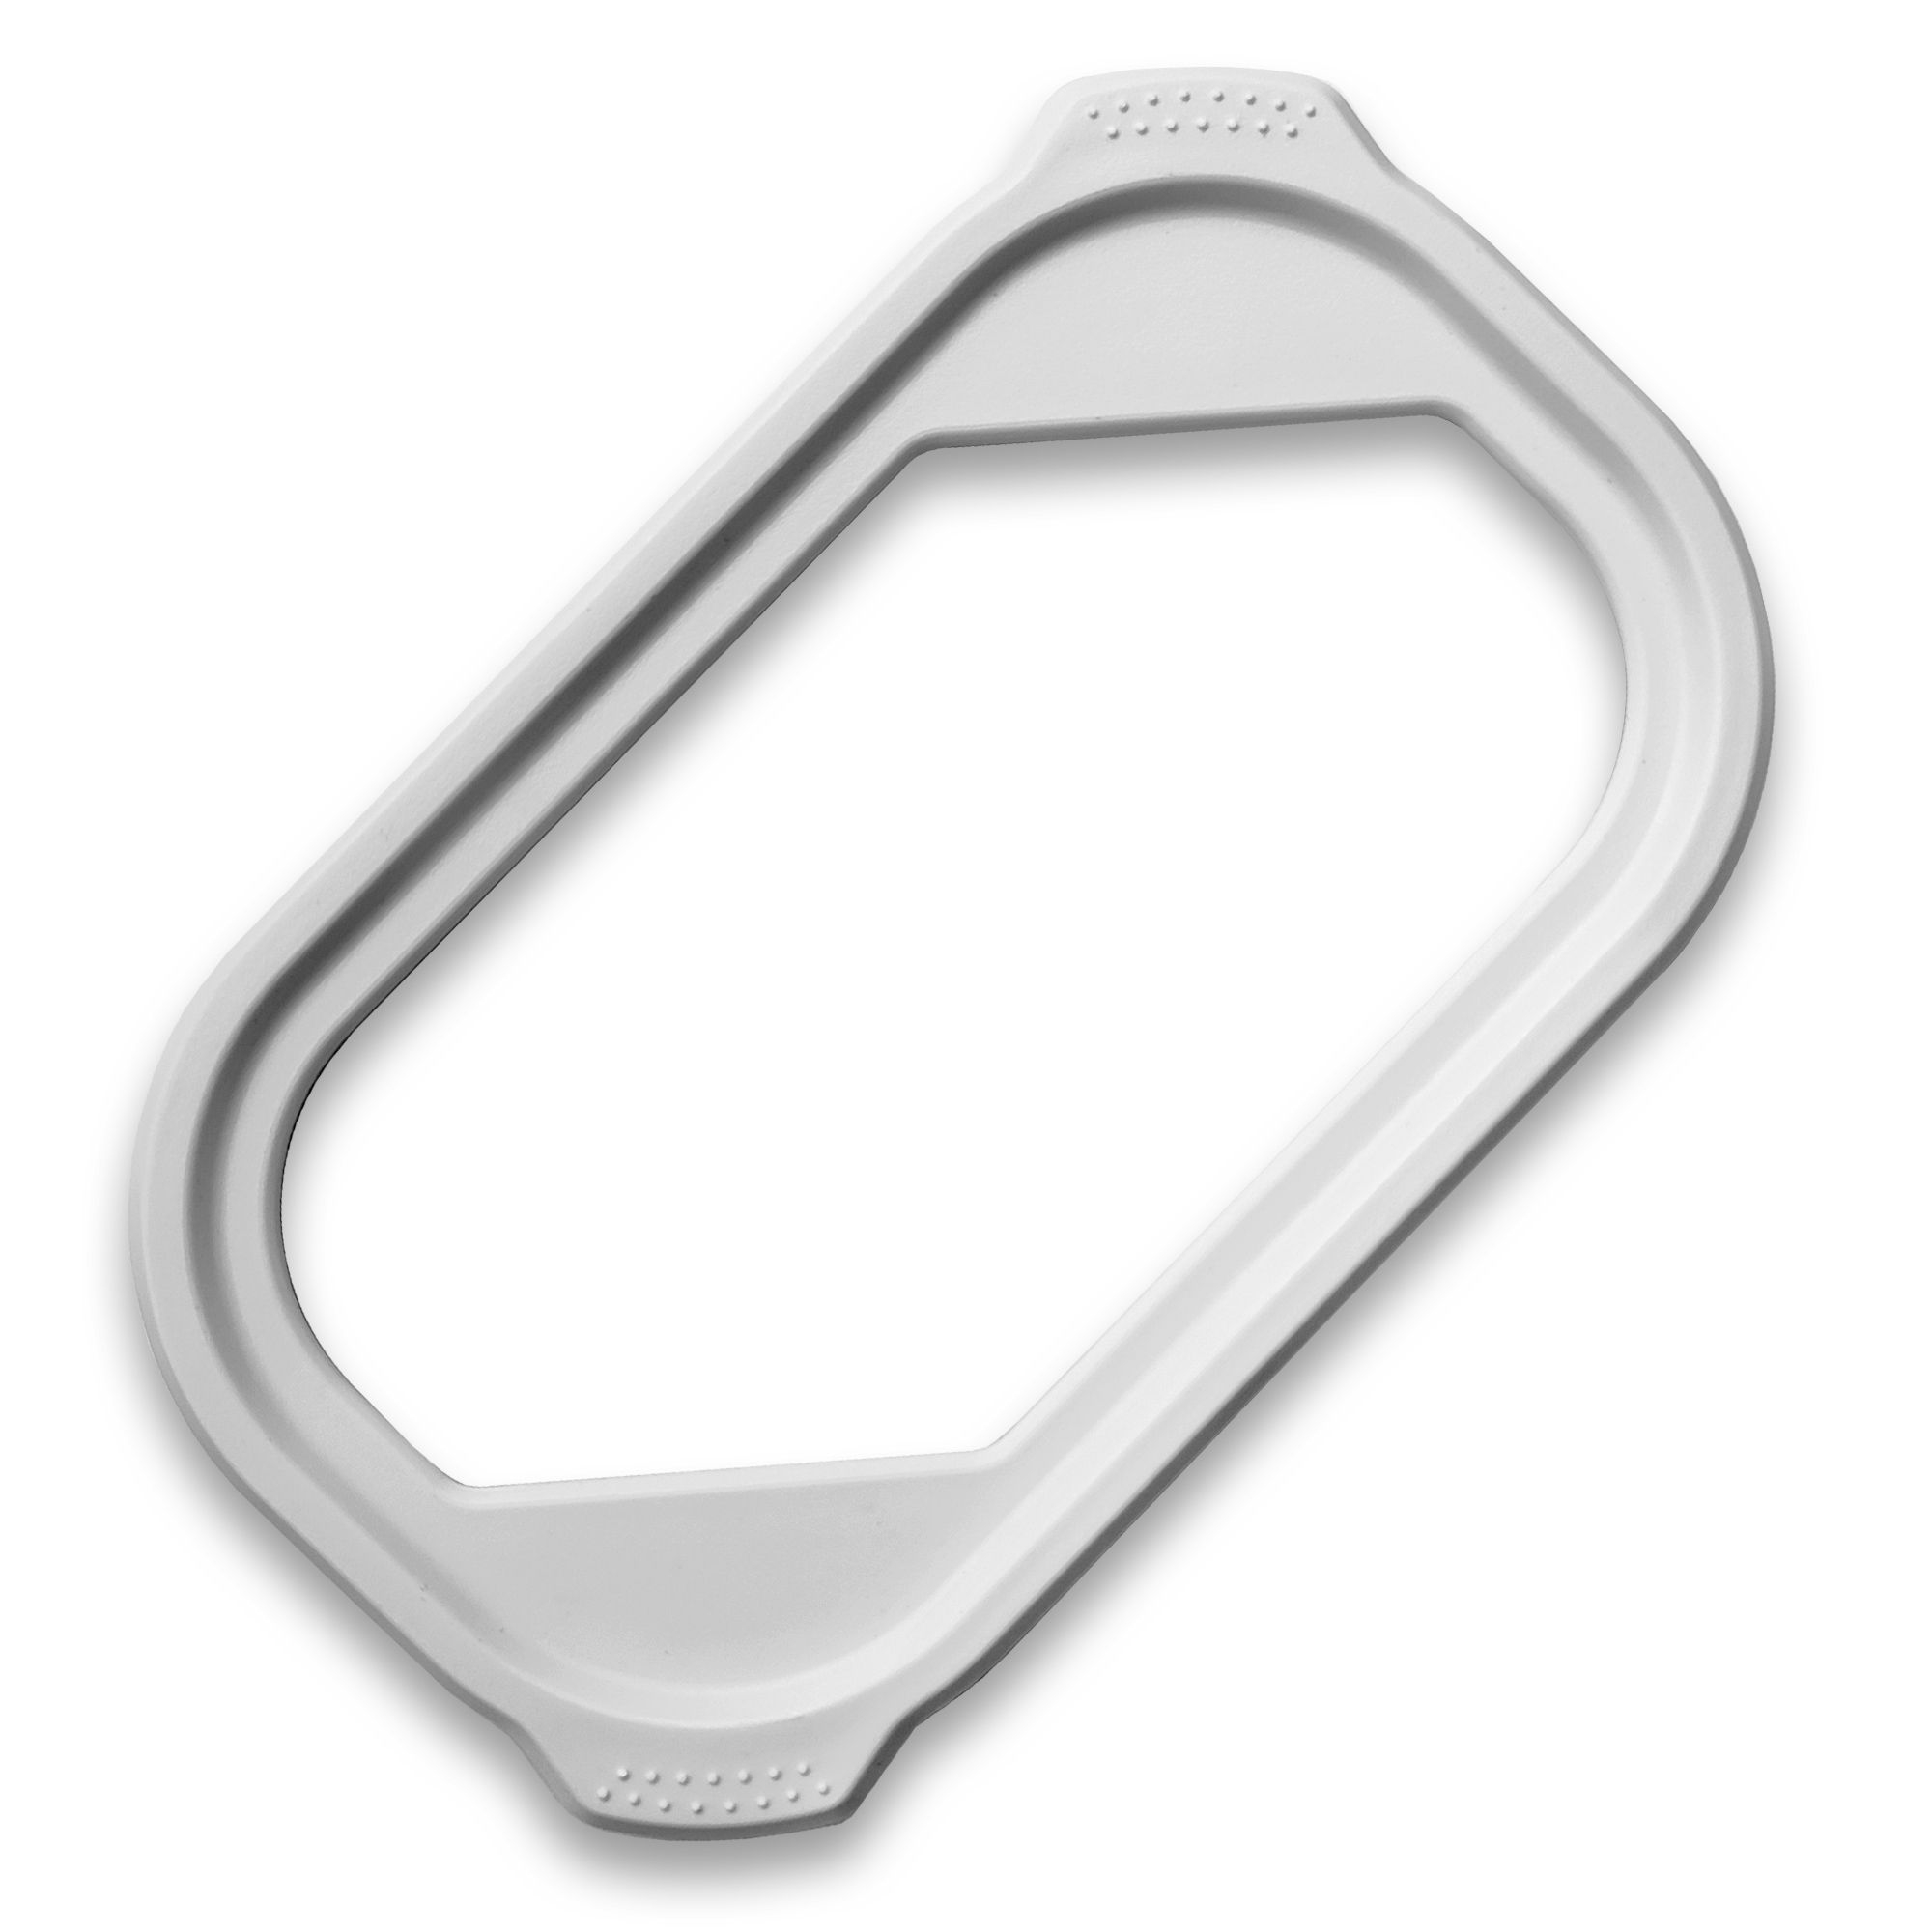 Culinaris - Lid for Storage Container